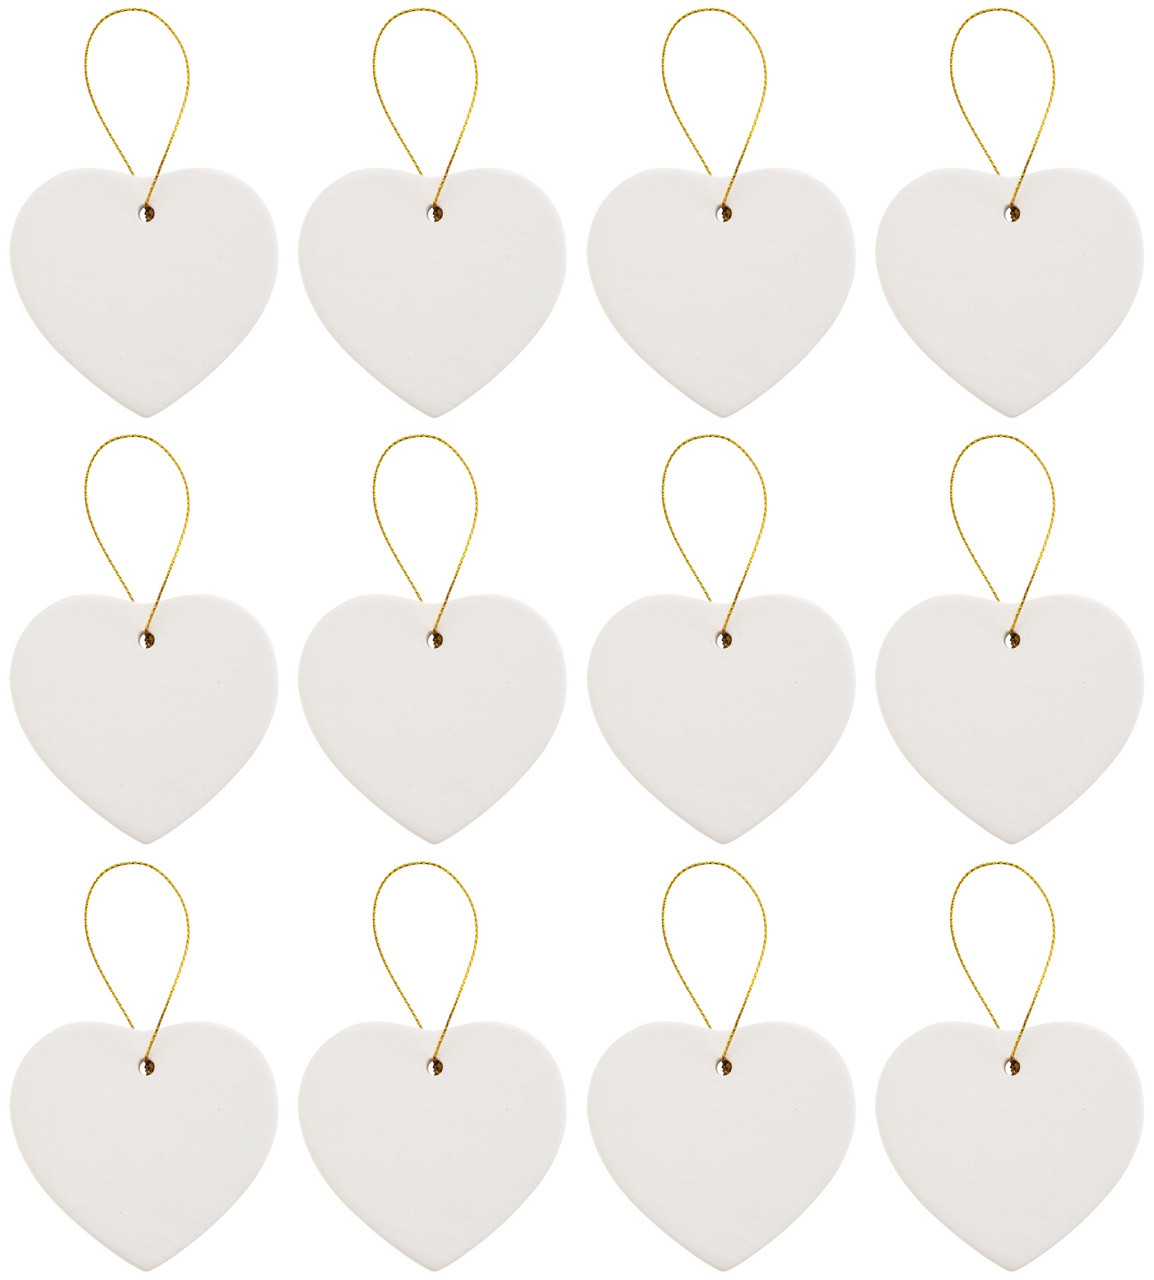 Ready to Paint DIY Porcelain Ceramic Heart Shape Ornaments with Hanger for  Christmas Tree and Holiday Decoration